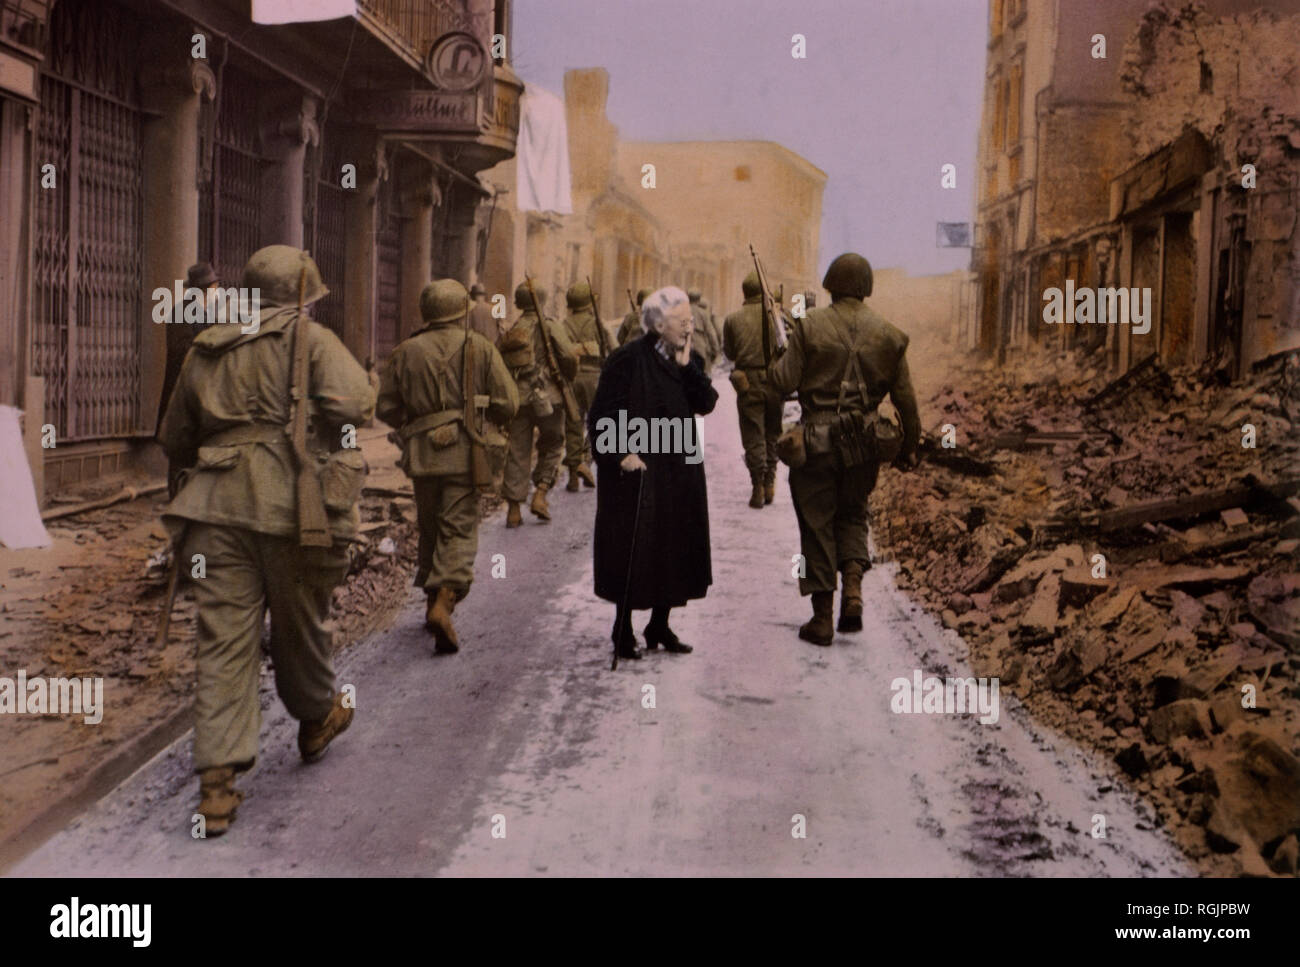 Infantry Troops Marching Through Town, Elderly Woman Looking at Demolished Buildings in German Town, Central Europe Campaign, Western Allied Invasion of Germany, 1945 Stock Photo